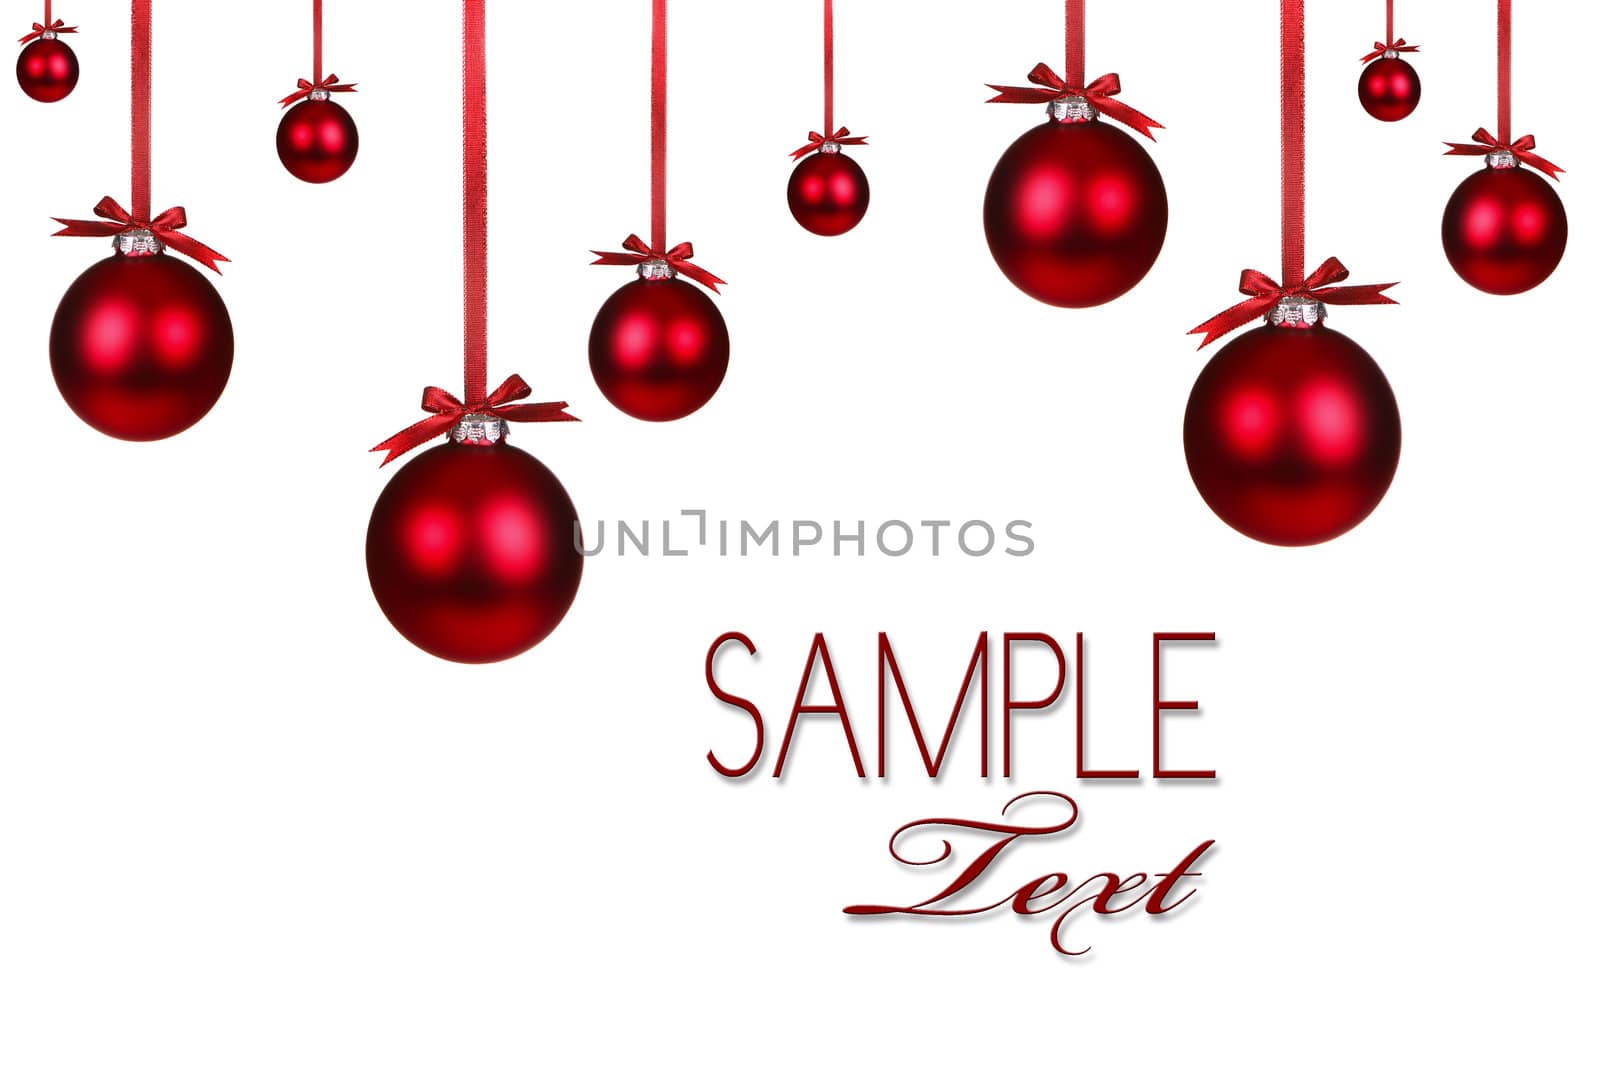 Christmas Holiday Background With Hanging Red Ornaments and Copy Space For Your Own Design